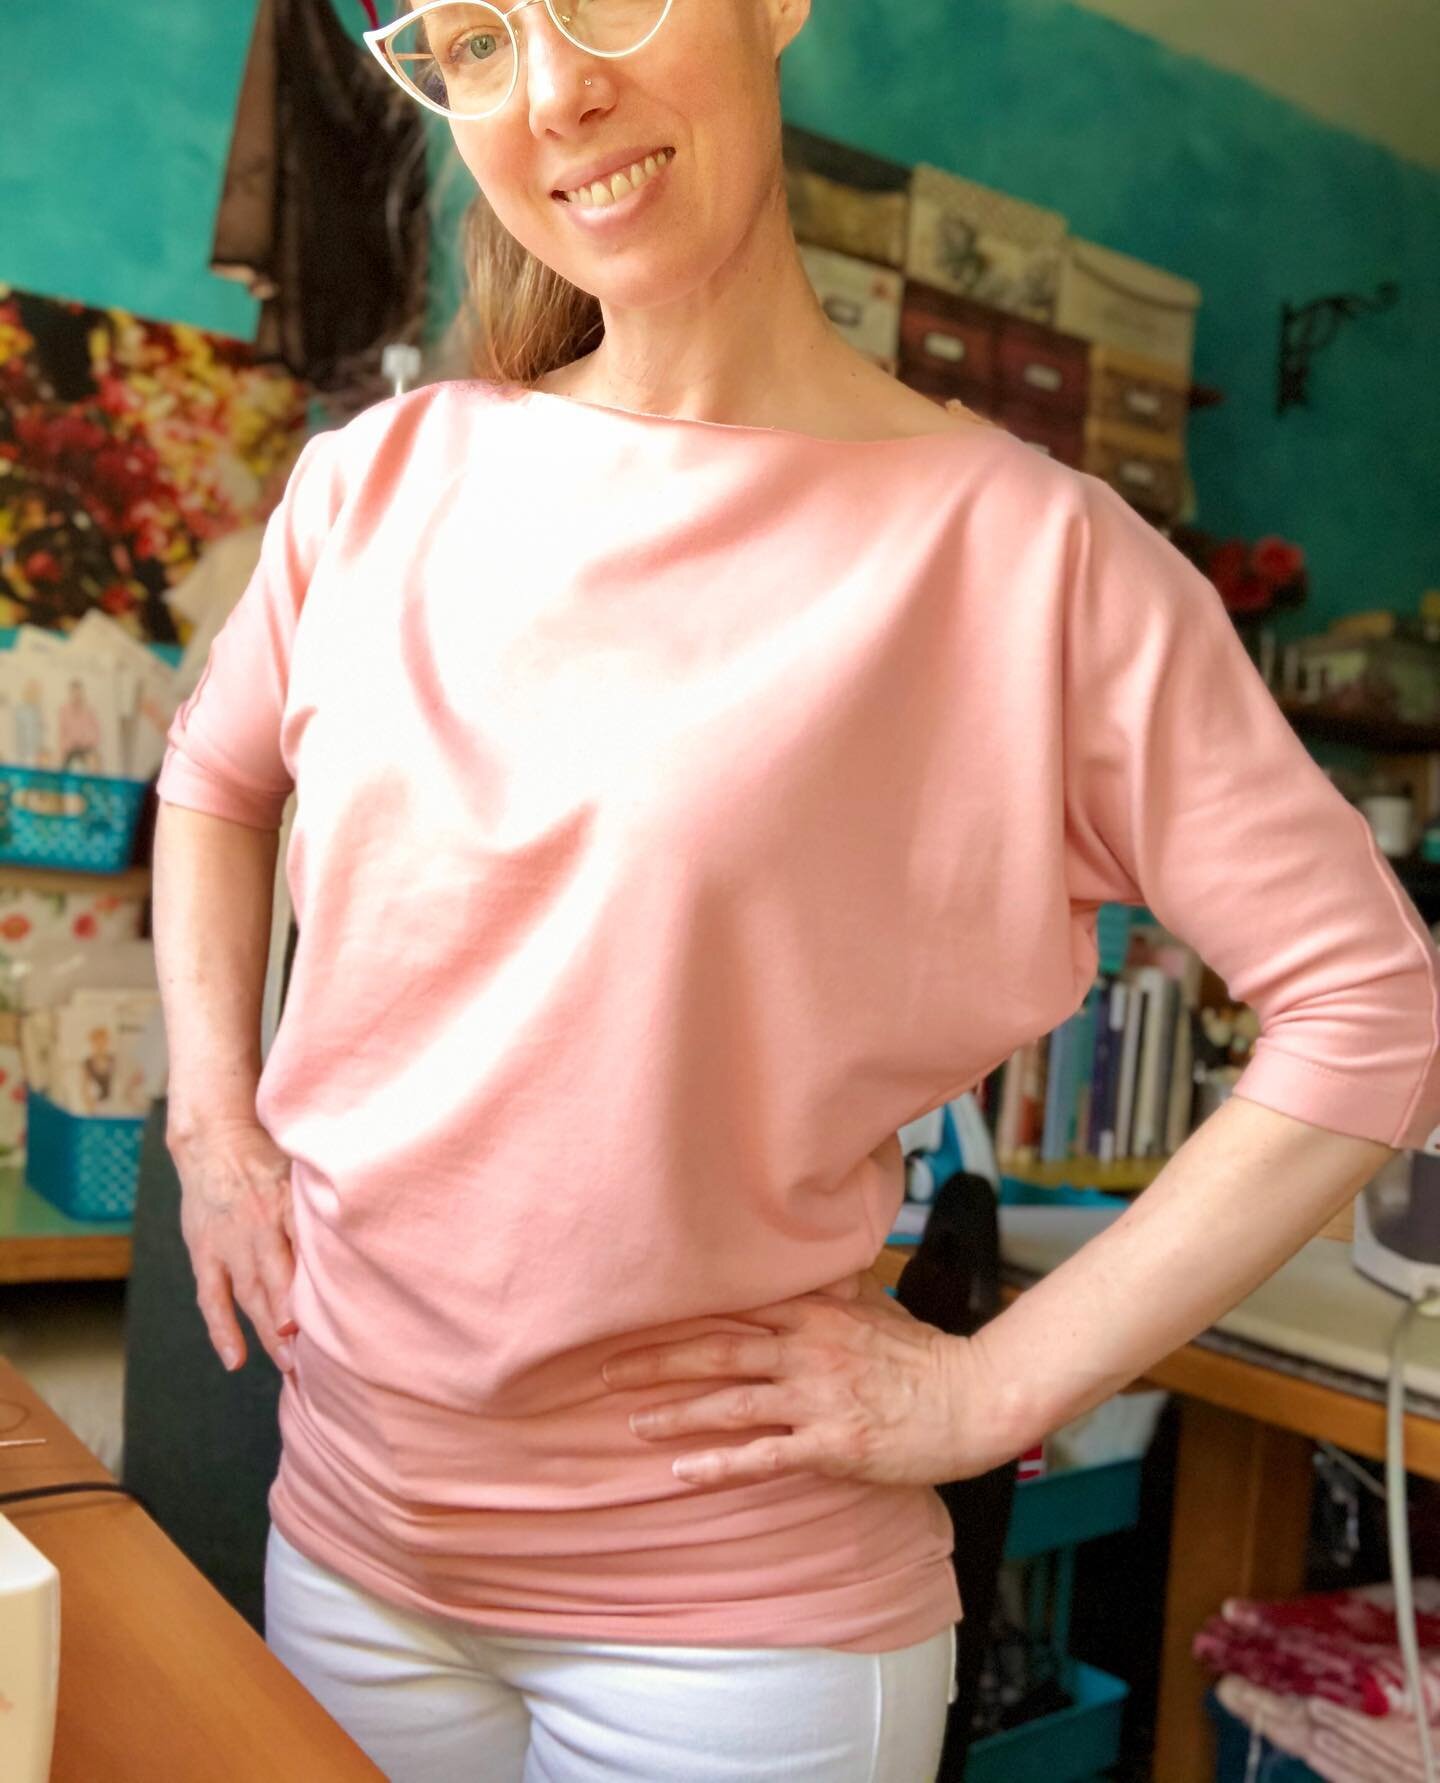 I need your votes and ideas! I sewed THREE knit tops today and I&rsquo;m tired and very hungry, so just snapping a quick photo of this last one, all done except the neckline ... I could finish it:
1) simply, with a thin band 
2) a drapey high neck co